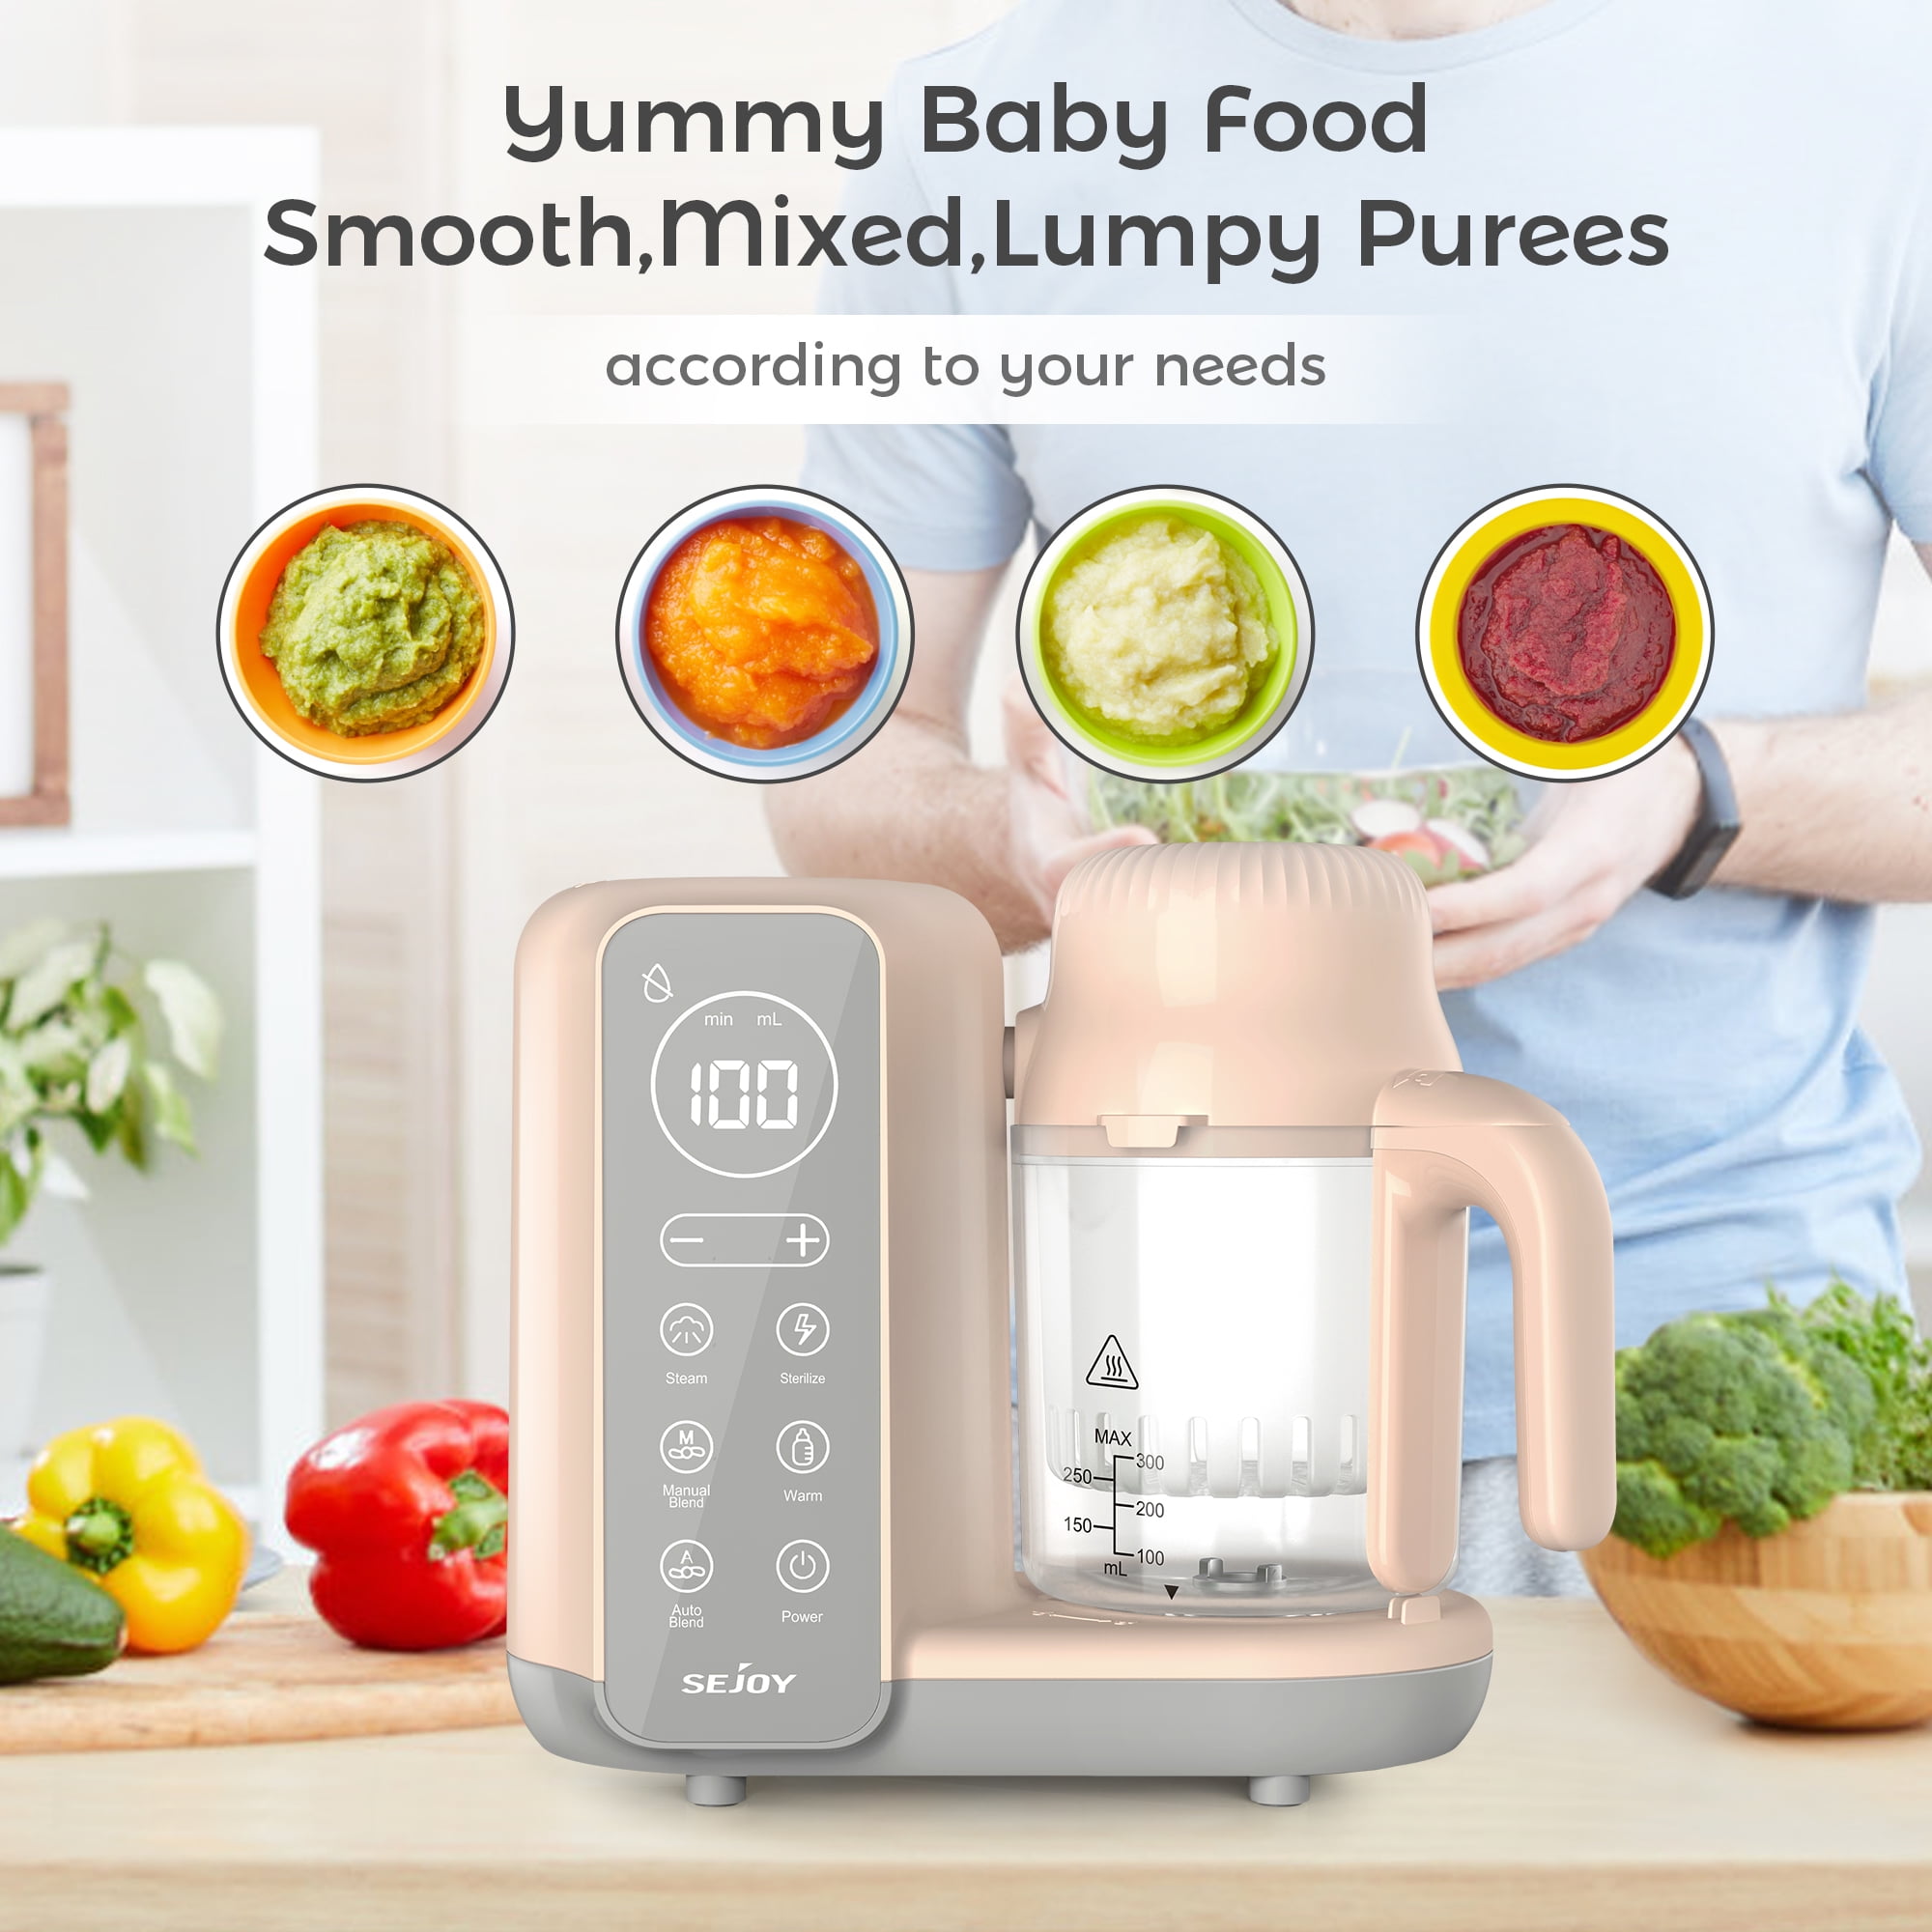 XSUN Baby Food Maker, Wireless Baby Food Processor Set for Baby Food, Fruit, Vegatable, Meat, Baby Food Blender with Baby Food Containers, Baby Food